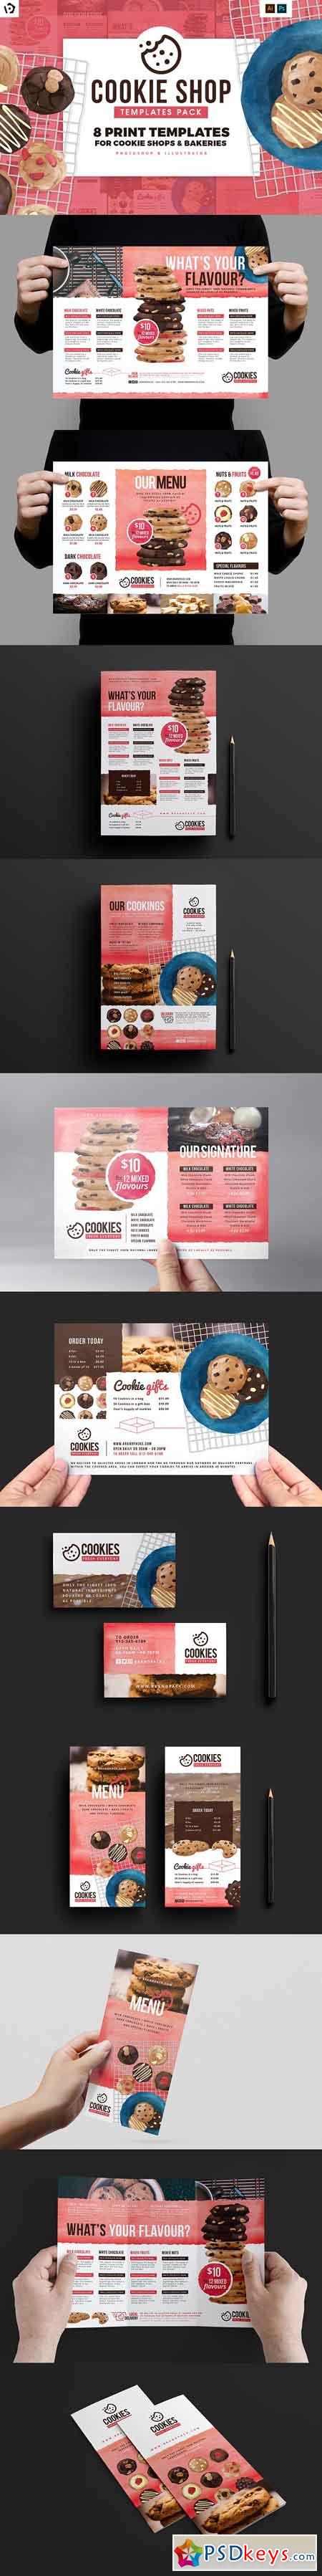 Cookie Shop Templates Pack 1576787